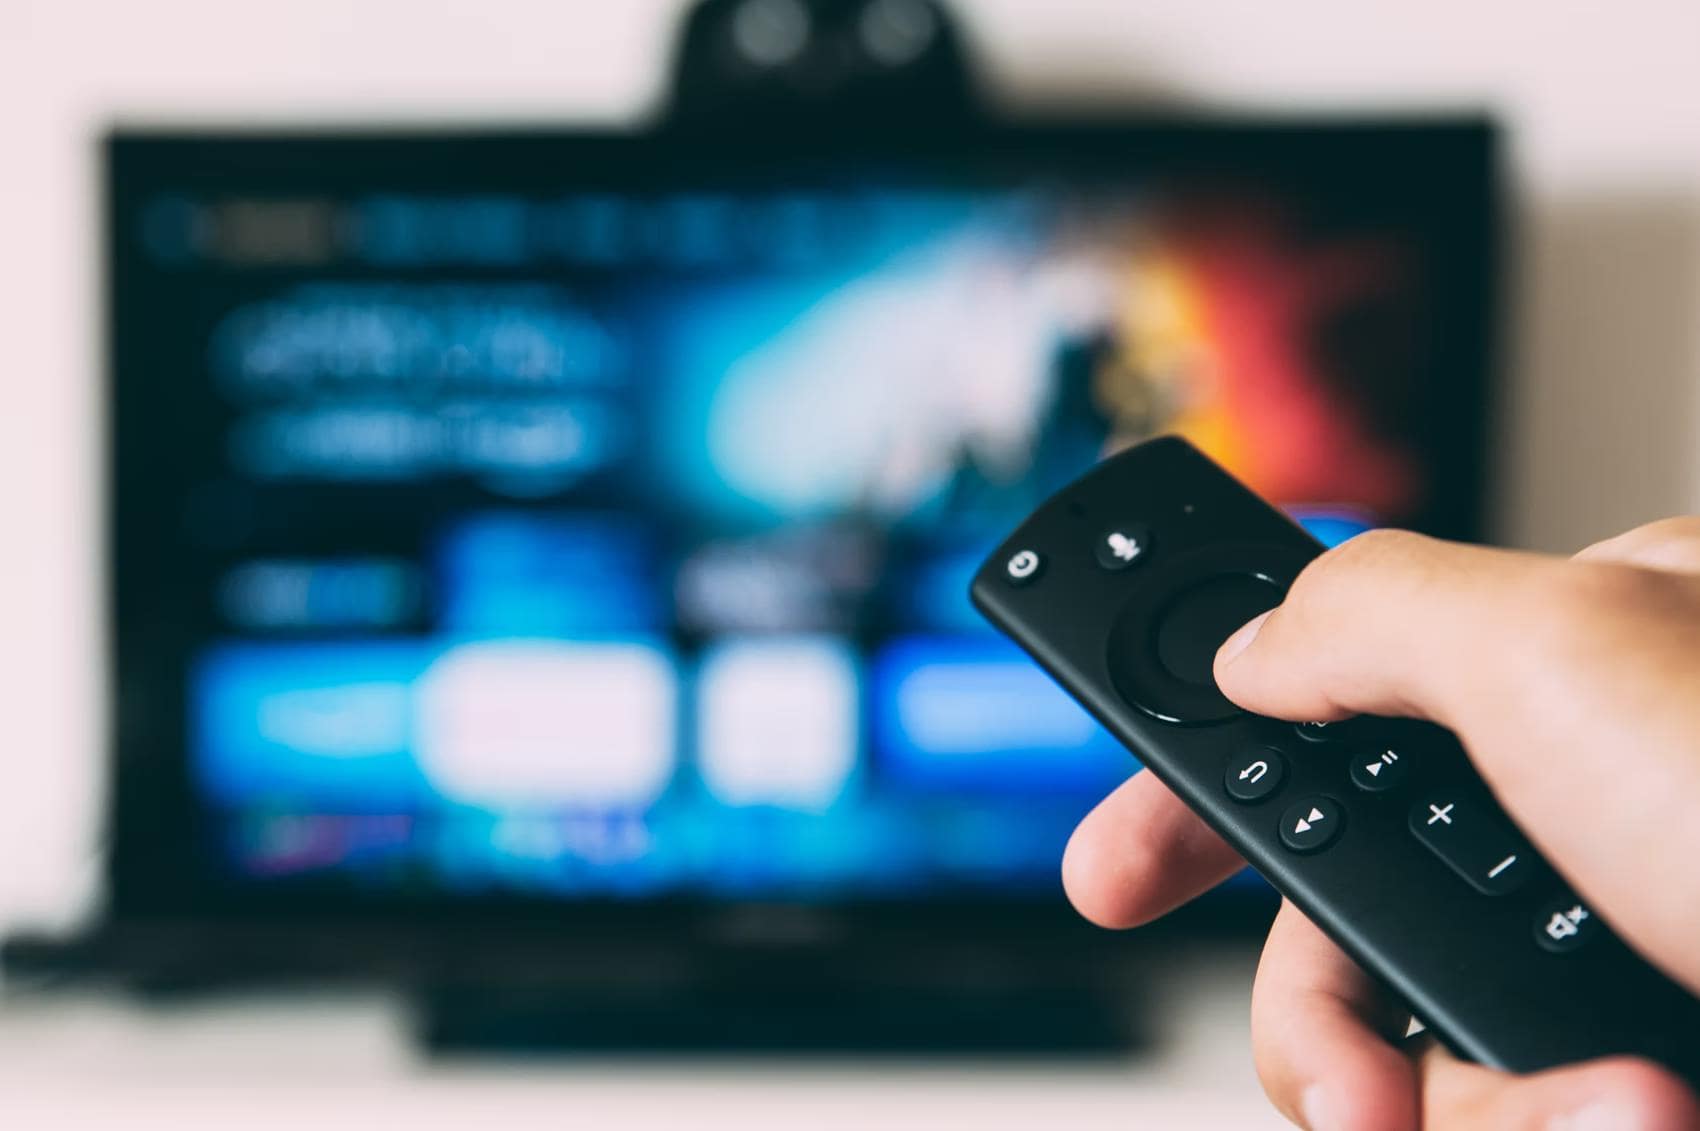 Home Automation Tips To Make Your Life Better. The remote control for TV